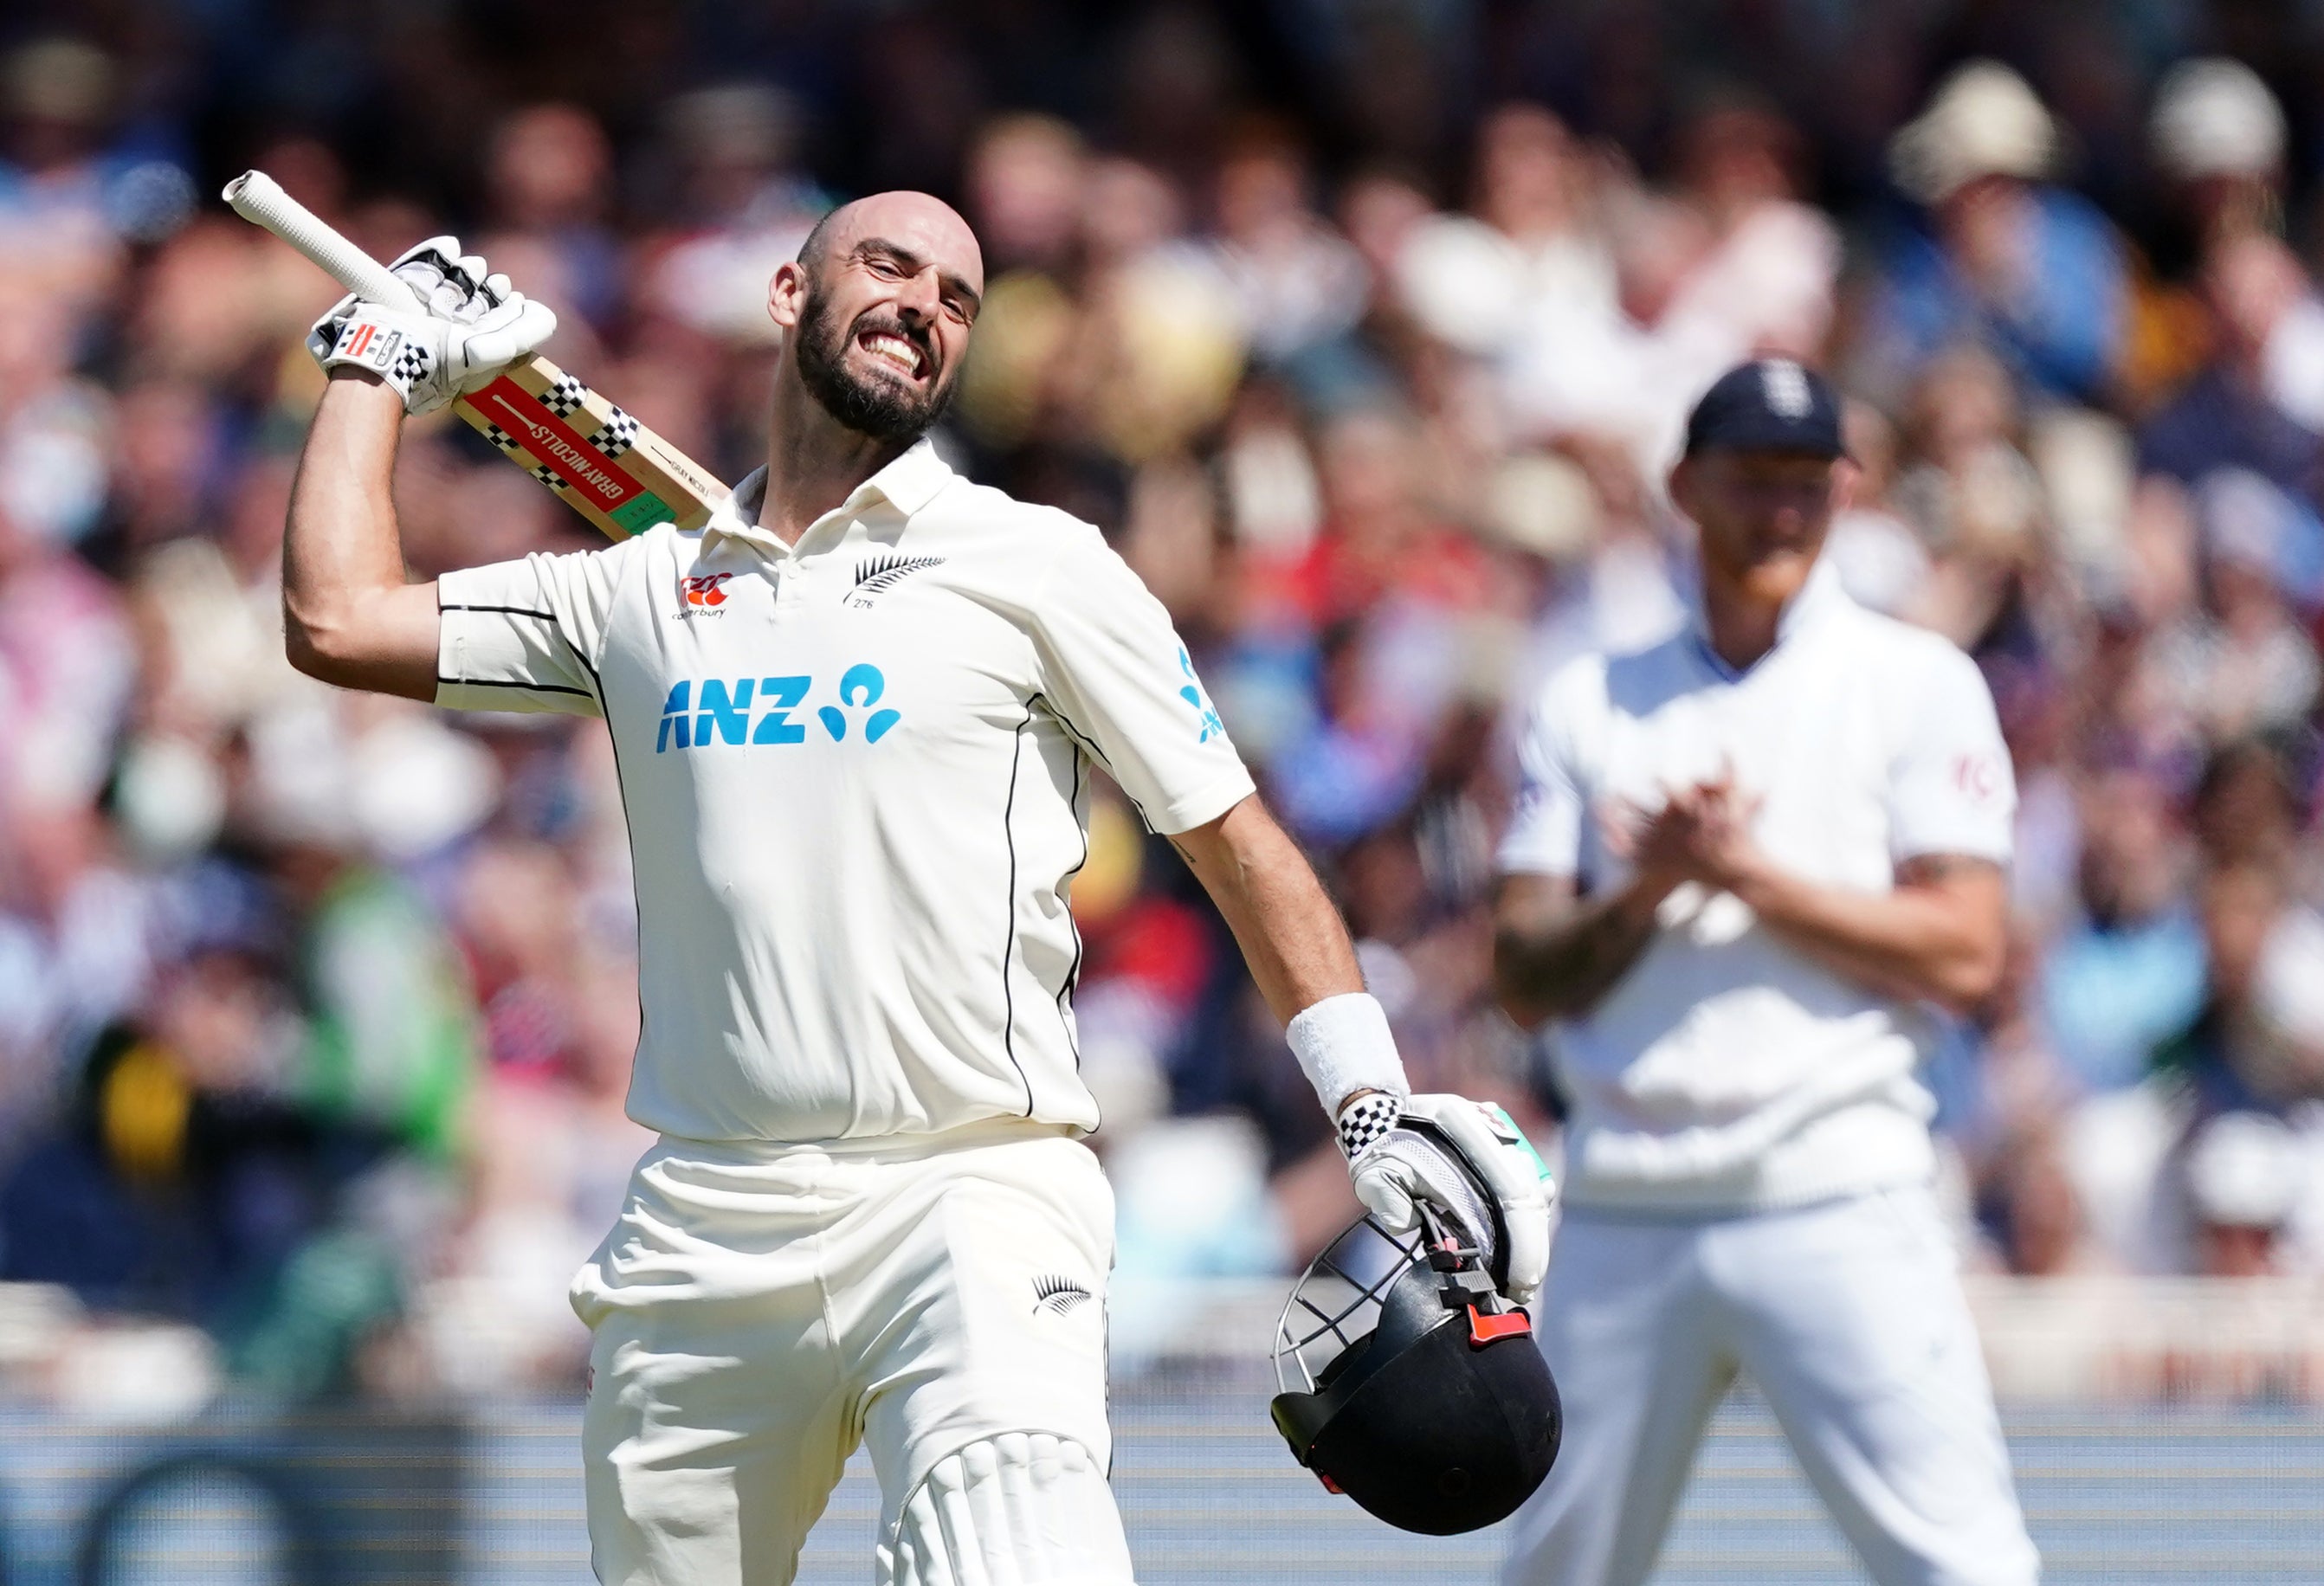 New Zealand’s Daryl Mitchell celebrates after reaching a century on day two of the second Test against England at Trent Bridge